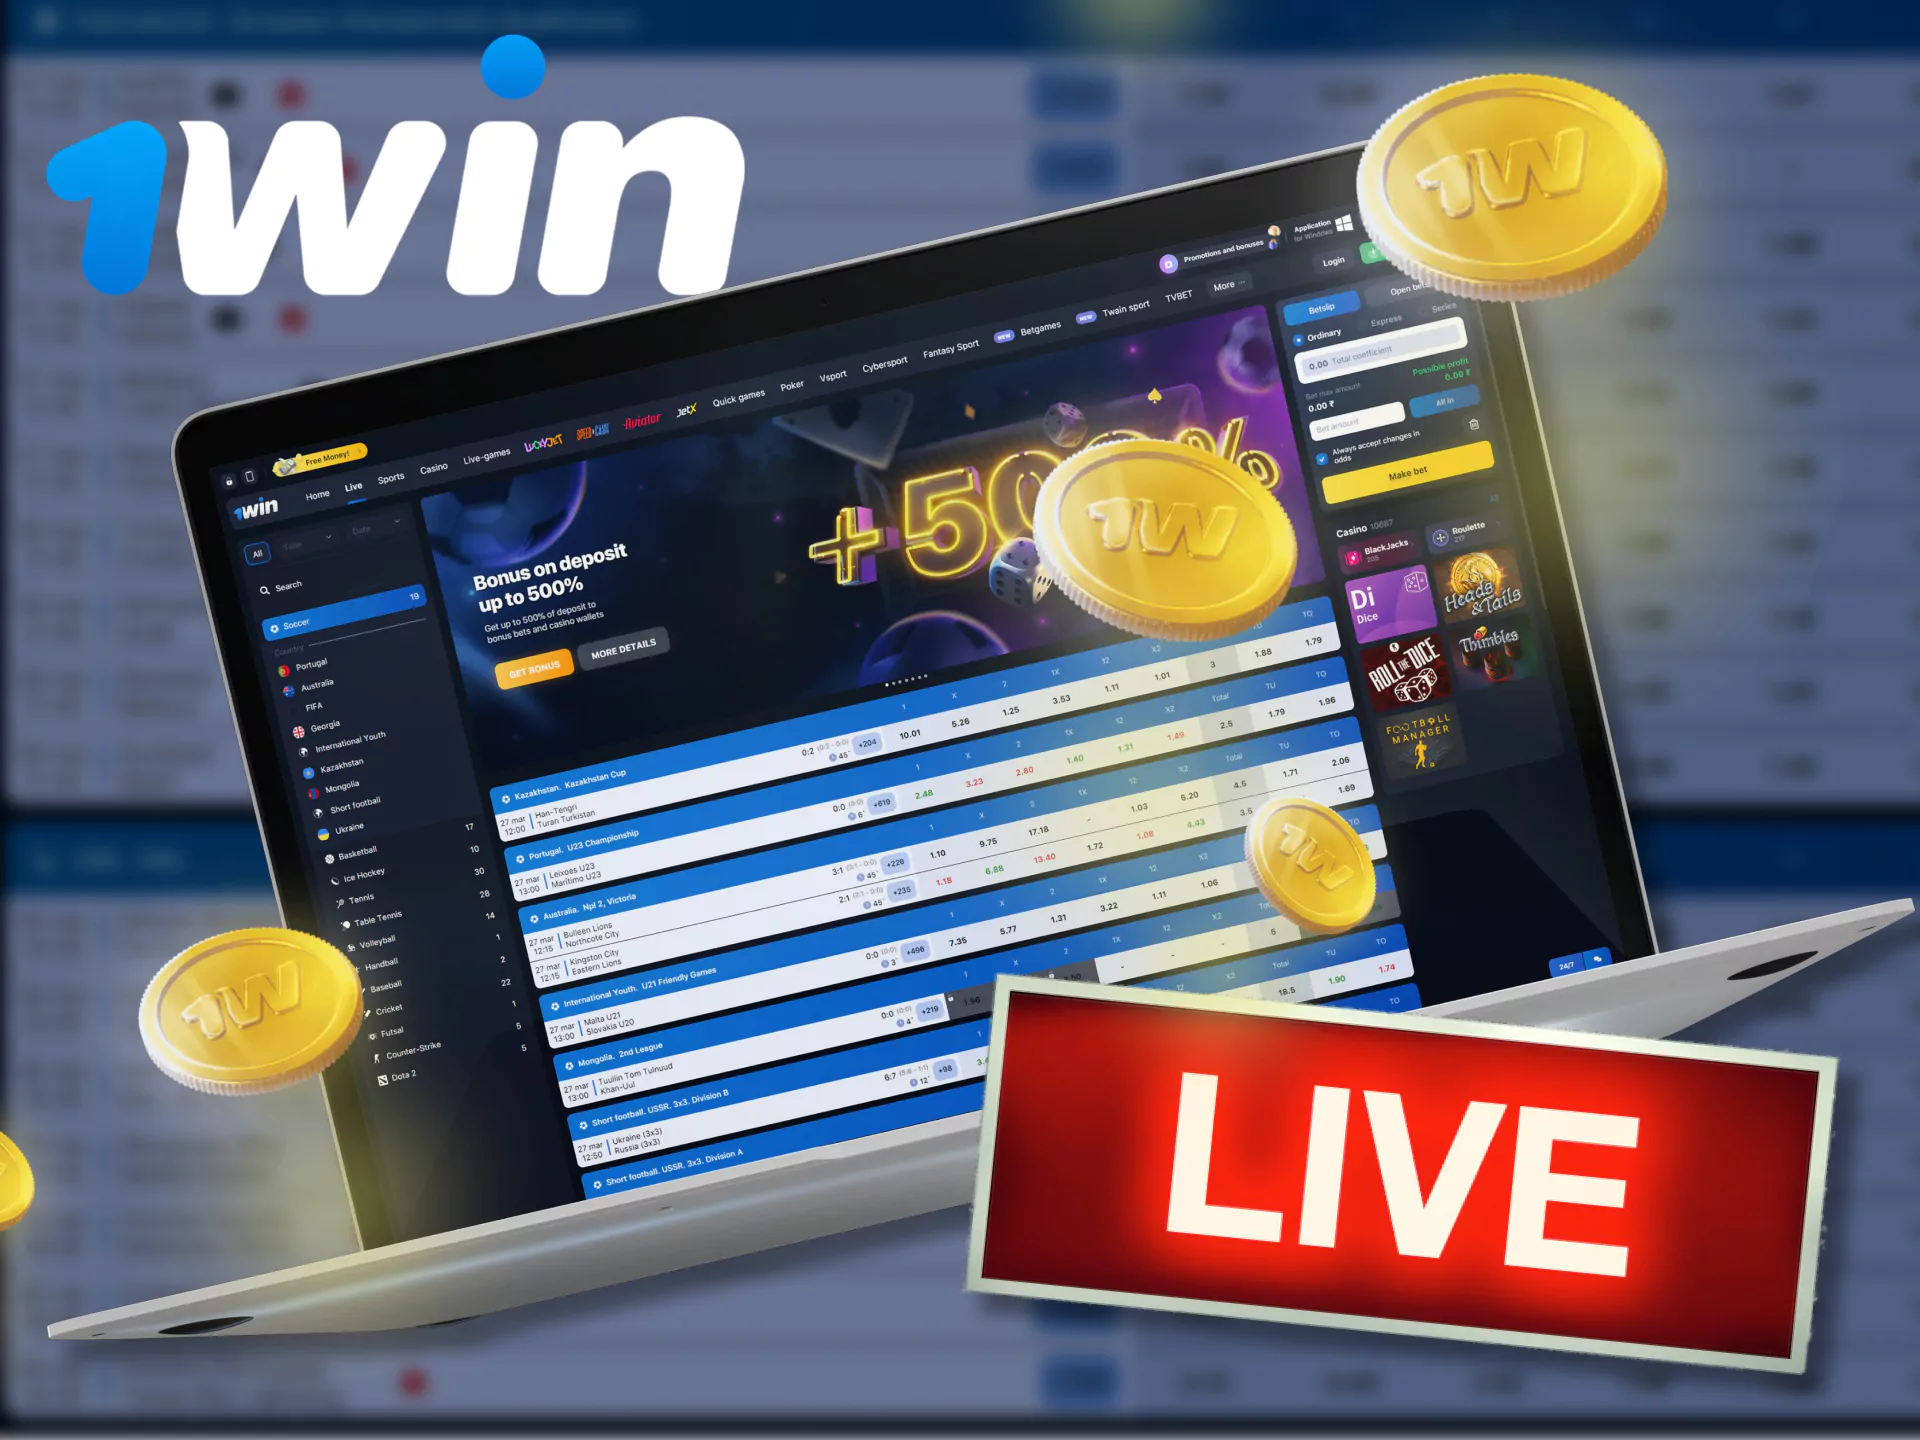 Bet on football matches during live streaming at 1win.